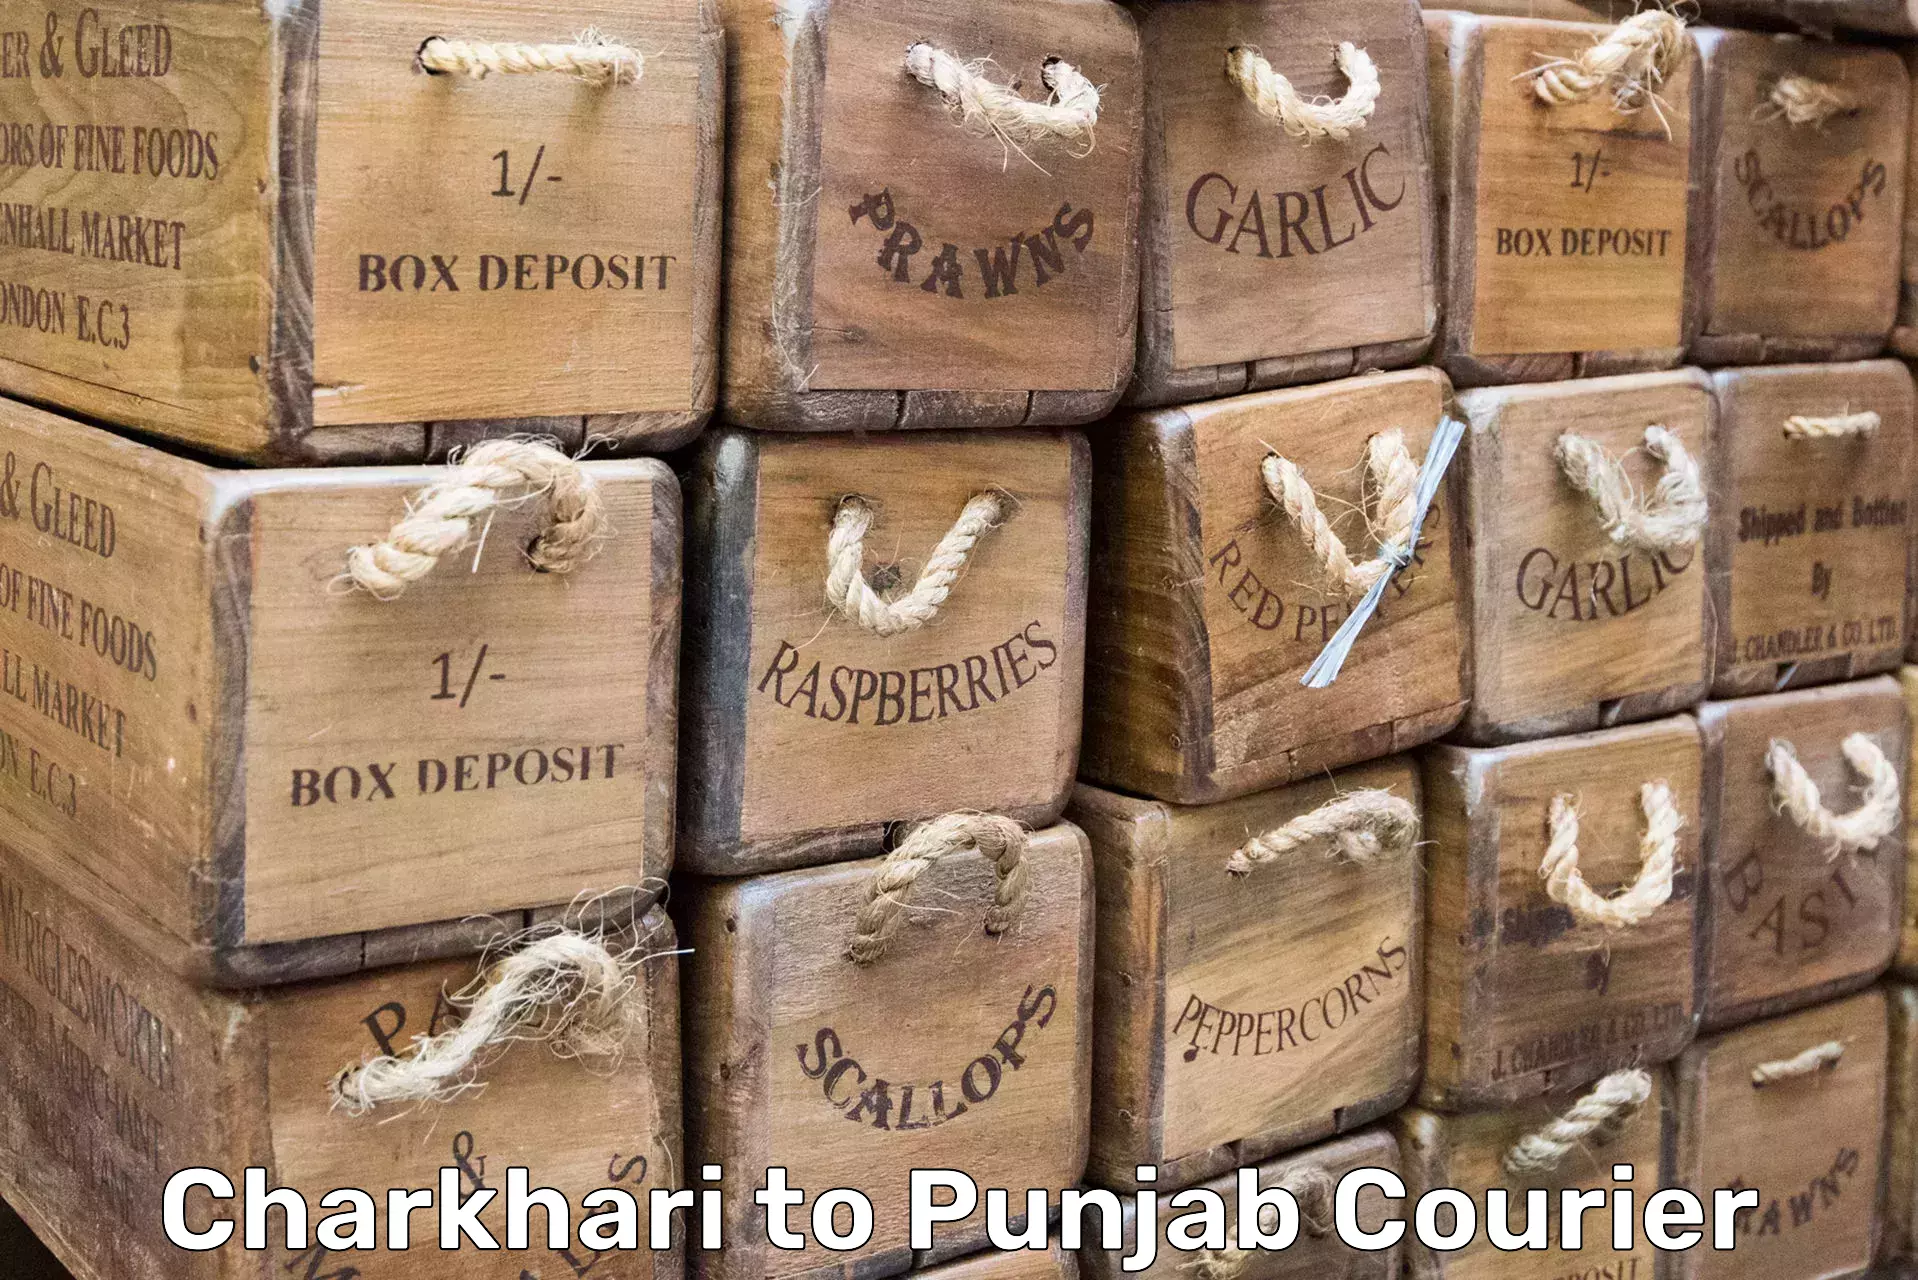 Moving and packing experts Charkhari to Ludhiana